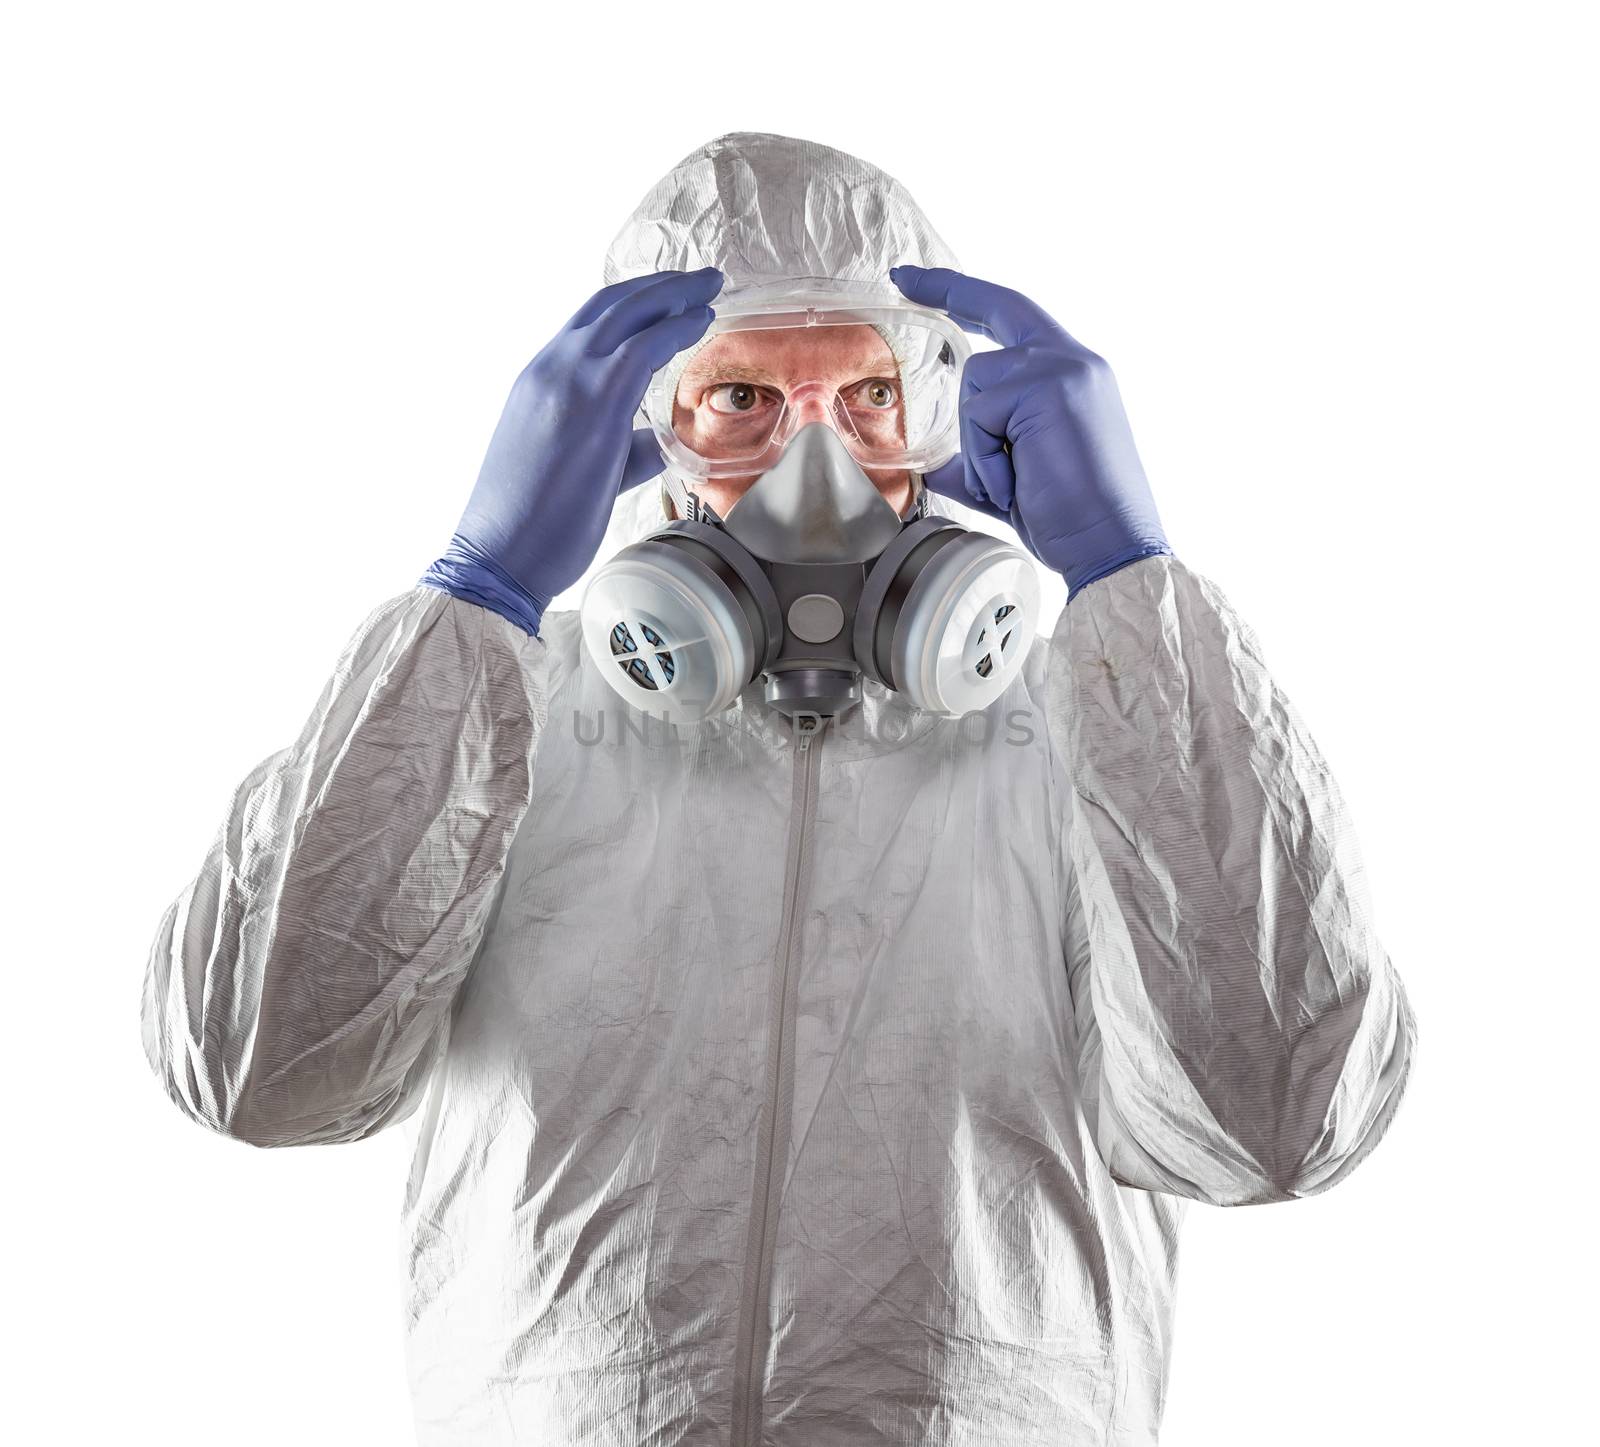 Man Wearing Hazmat Suit, Goggles and Gas Mask Isolated On White. by Feverpitched